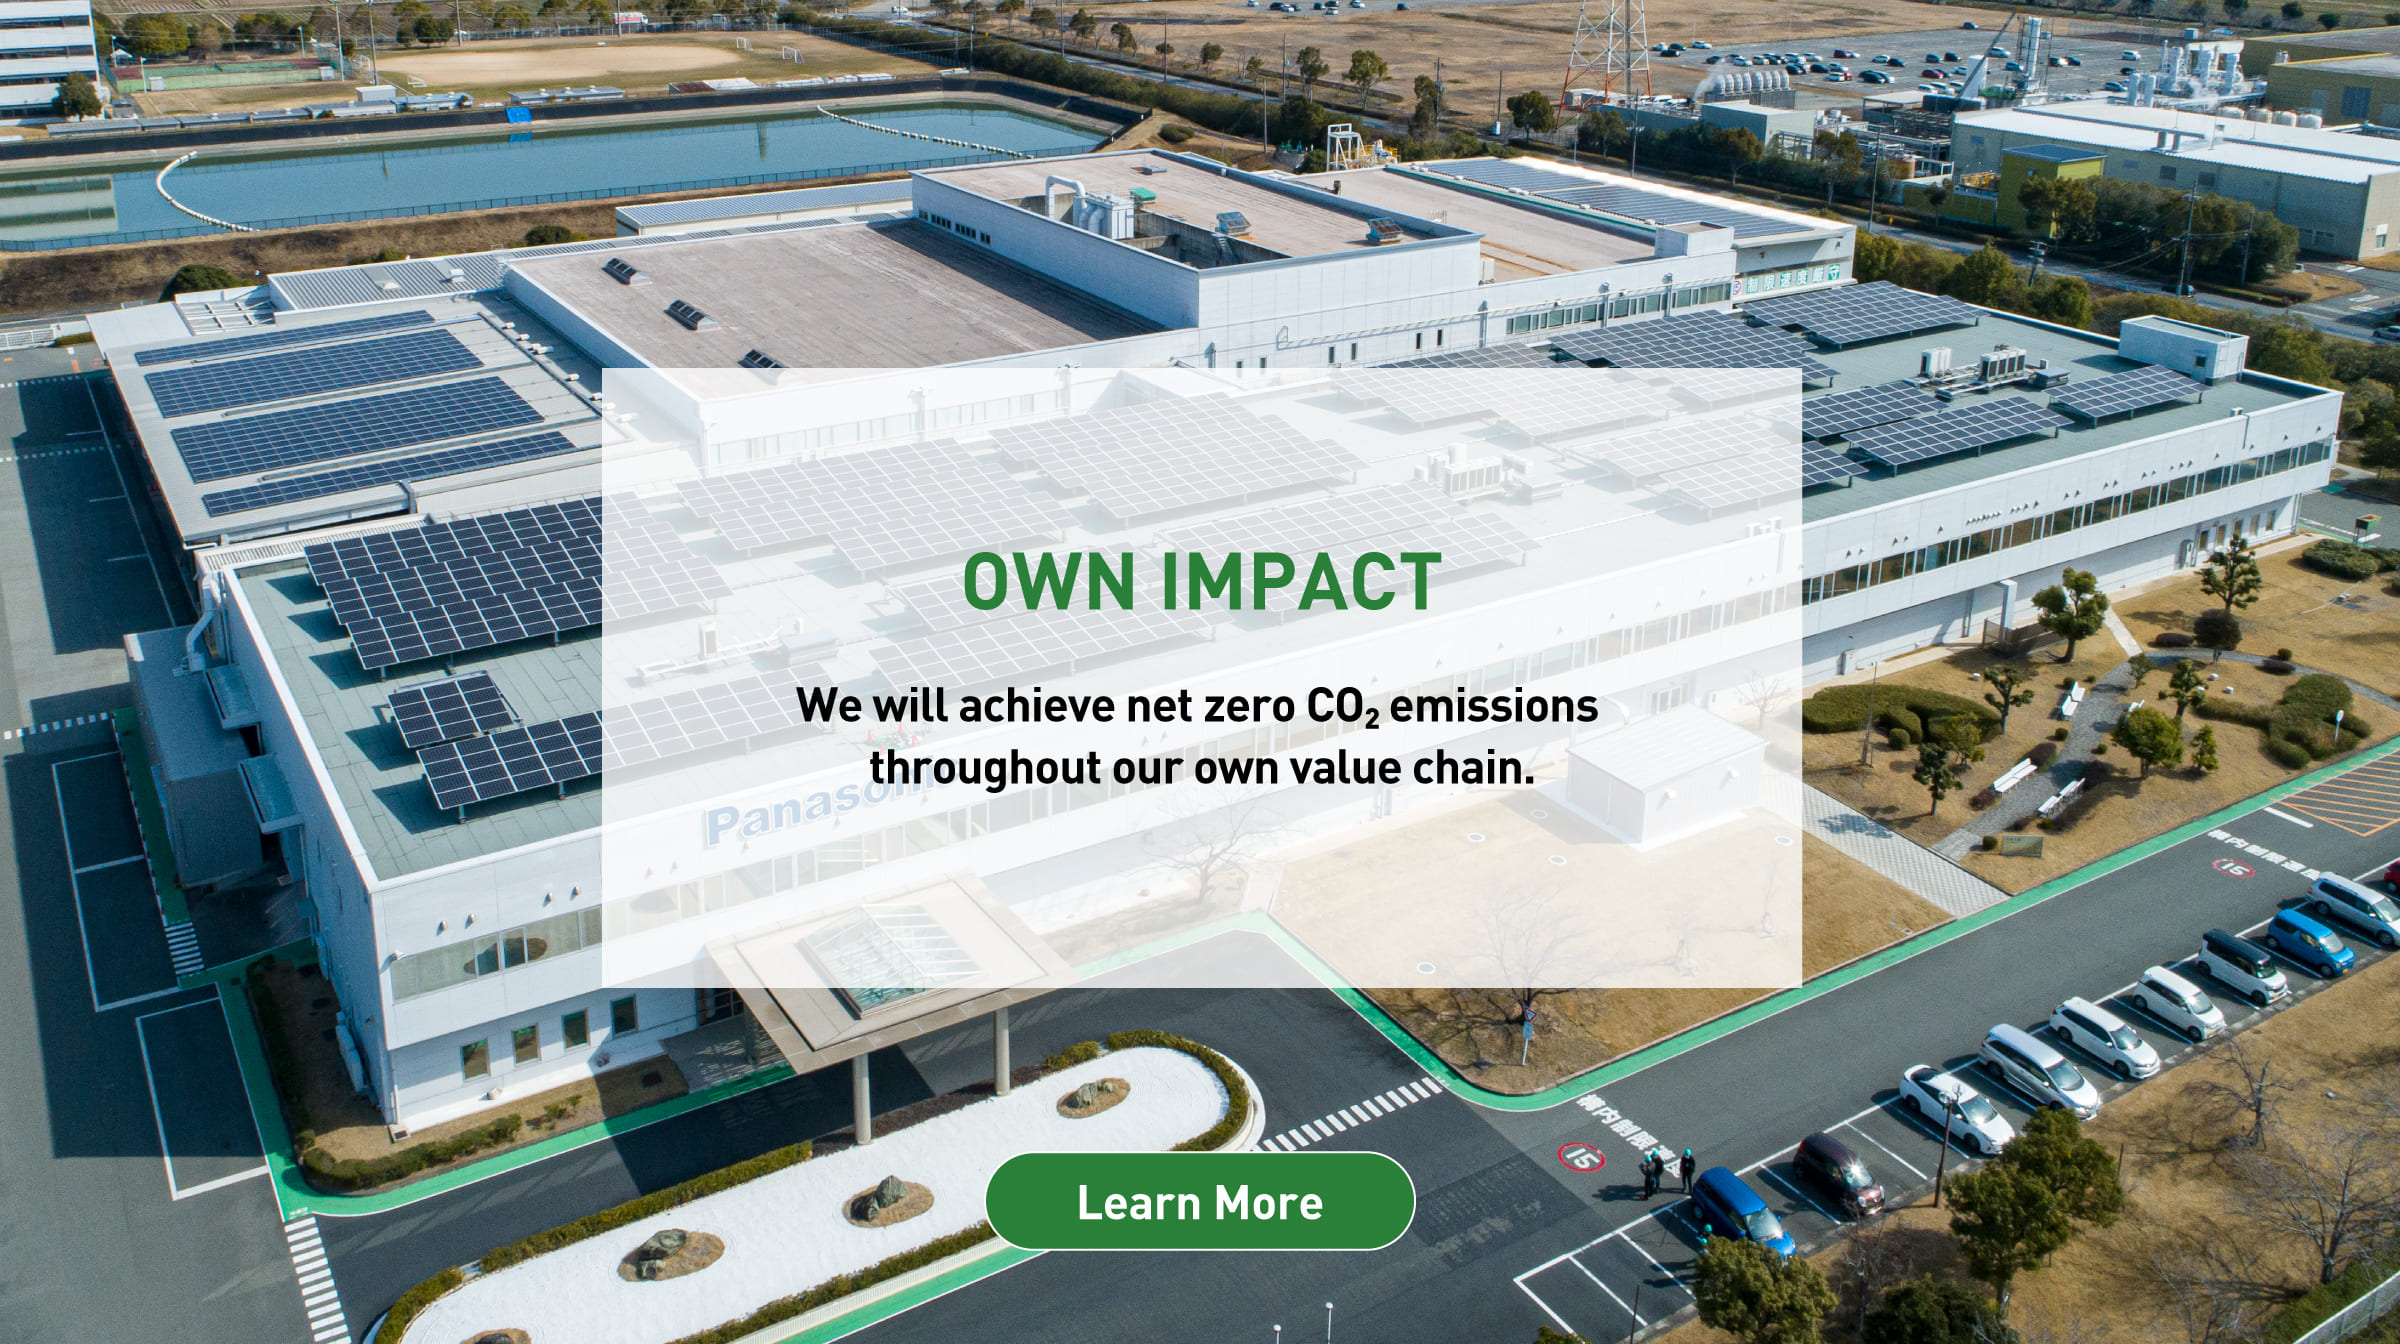 OWN IMPACT: We will achieve net zero CO2 emissions throughout our own value chain. Background photo: Aerial view of a Panasonic factory with rooftop solar panels installed. Learn more.